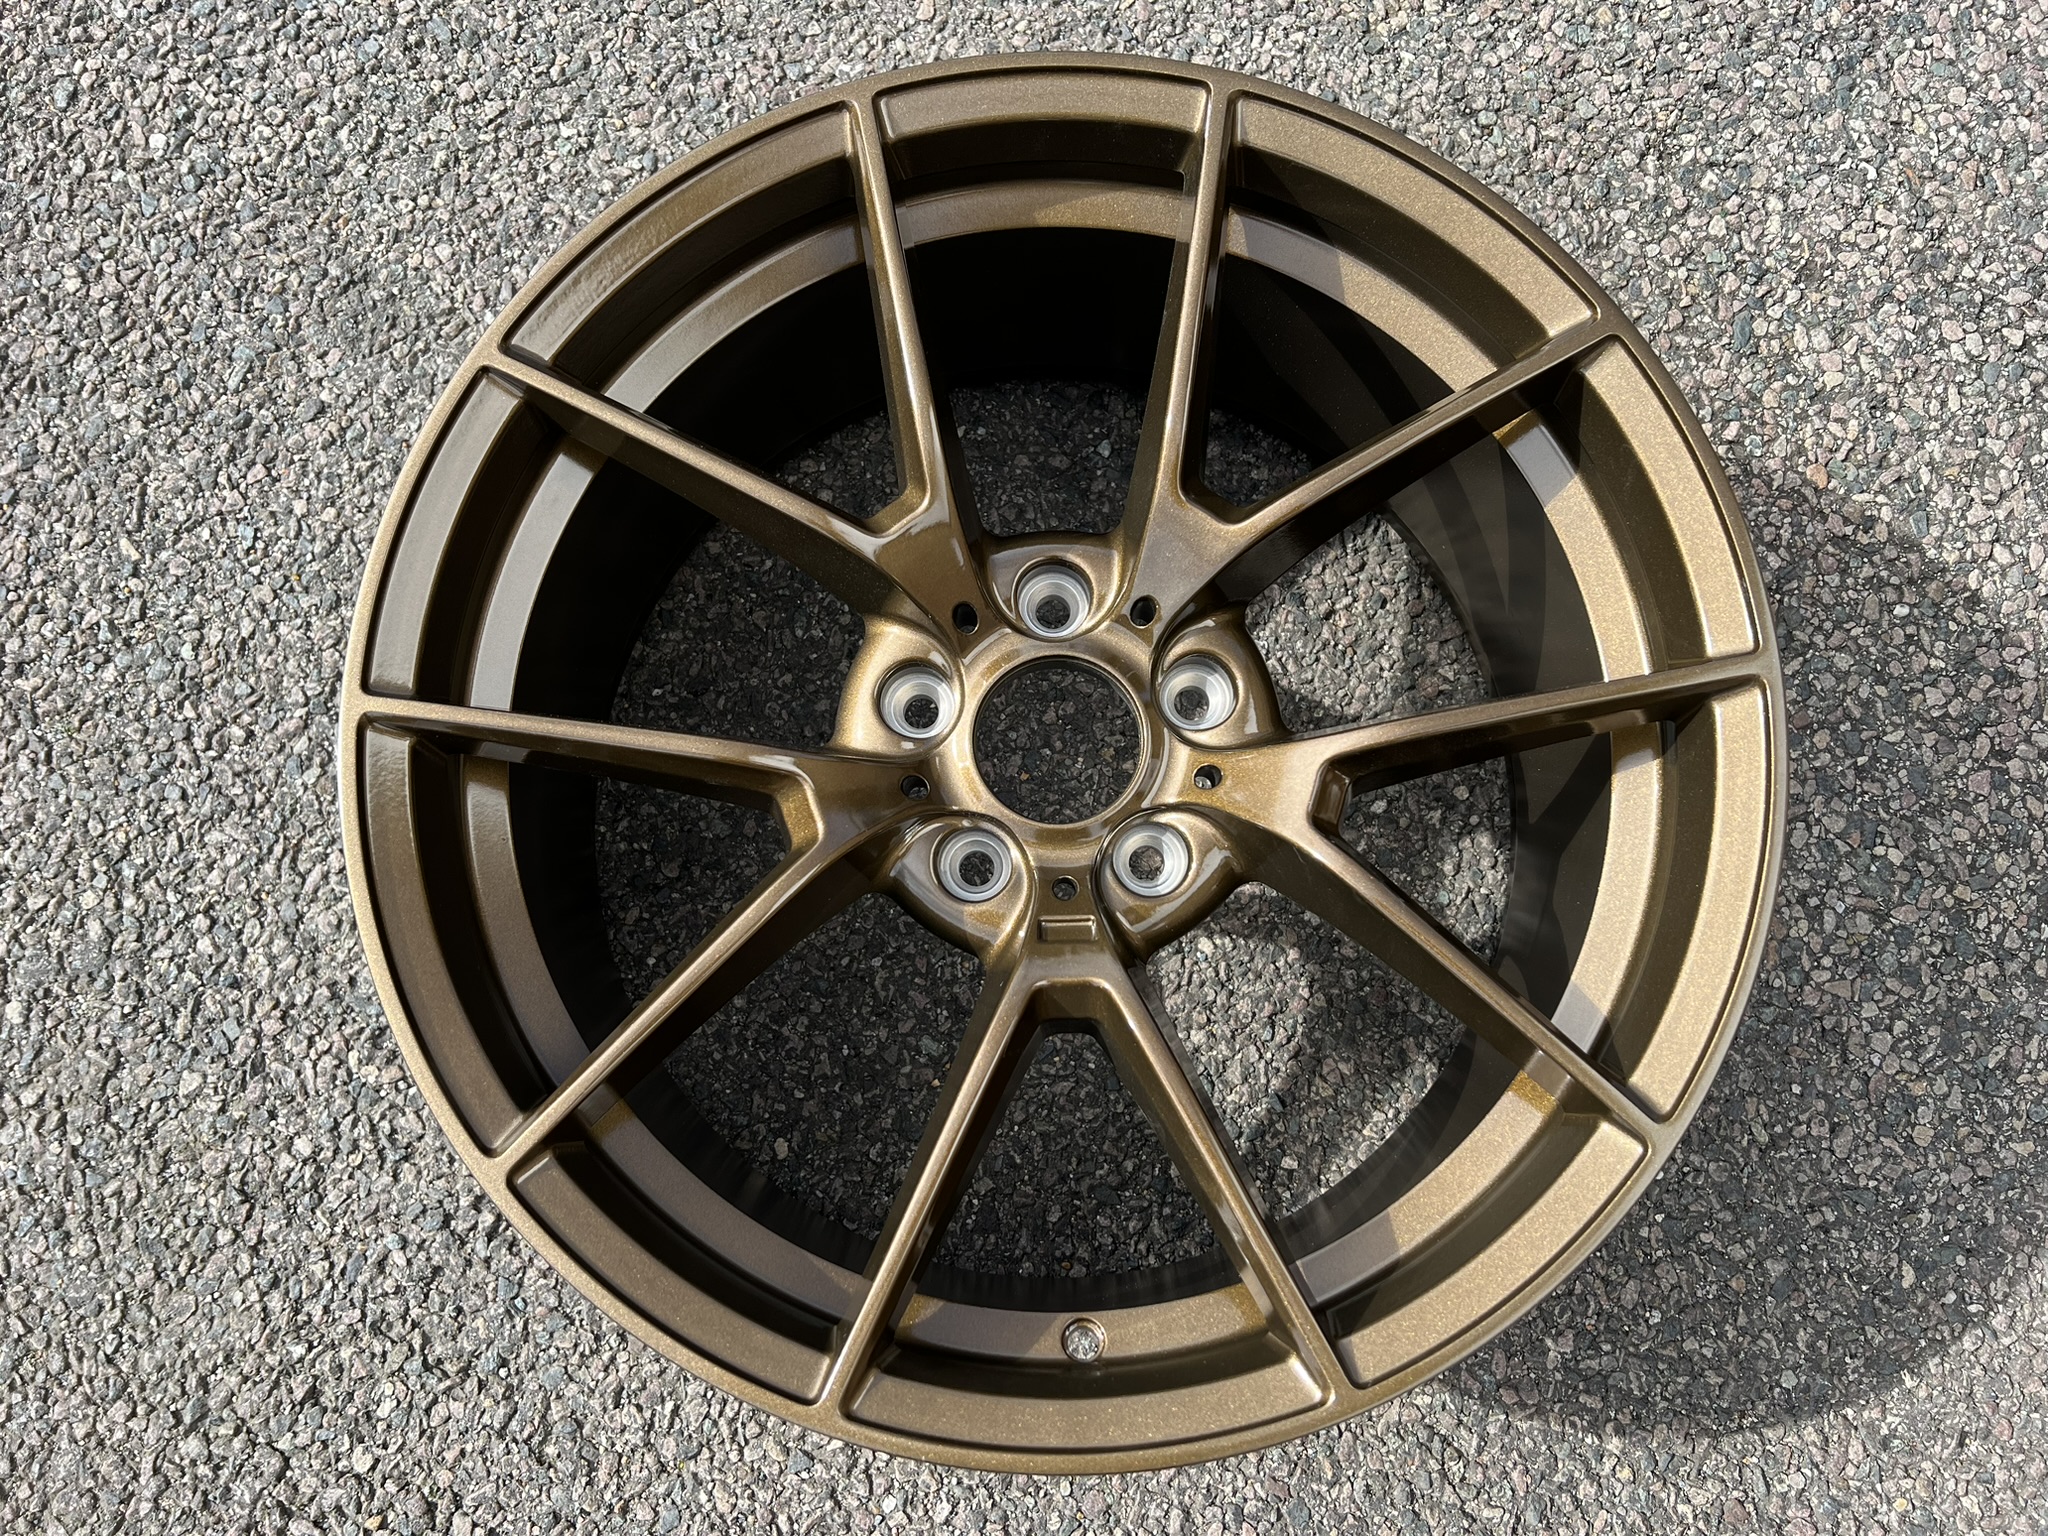 NEW 19  CS STYLE ALLOY WHEELS IN GLOSS BRONZE  WIDER 9 5  REAR